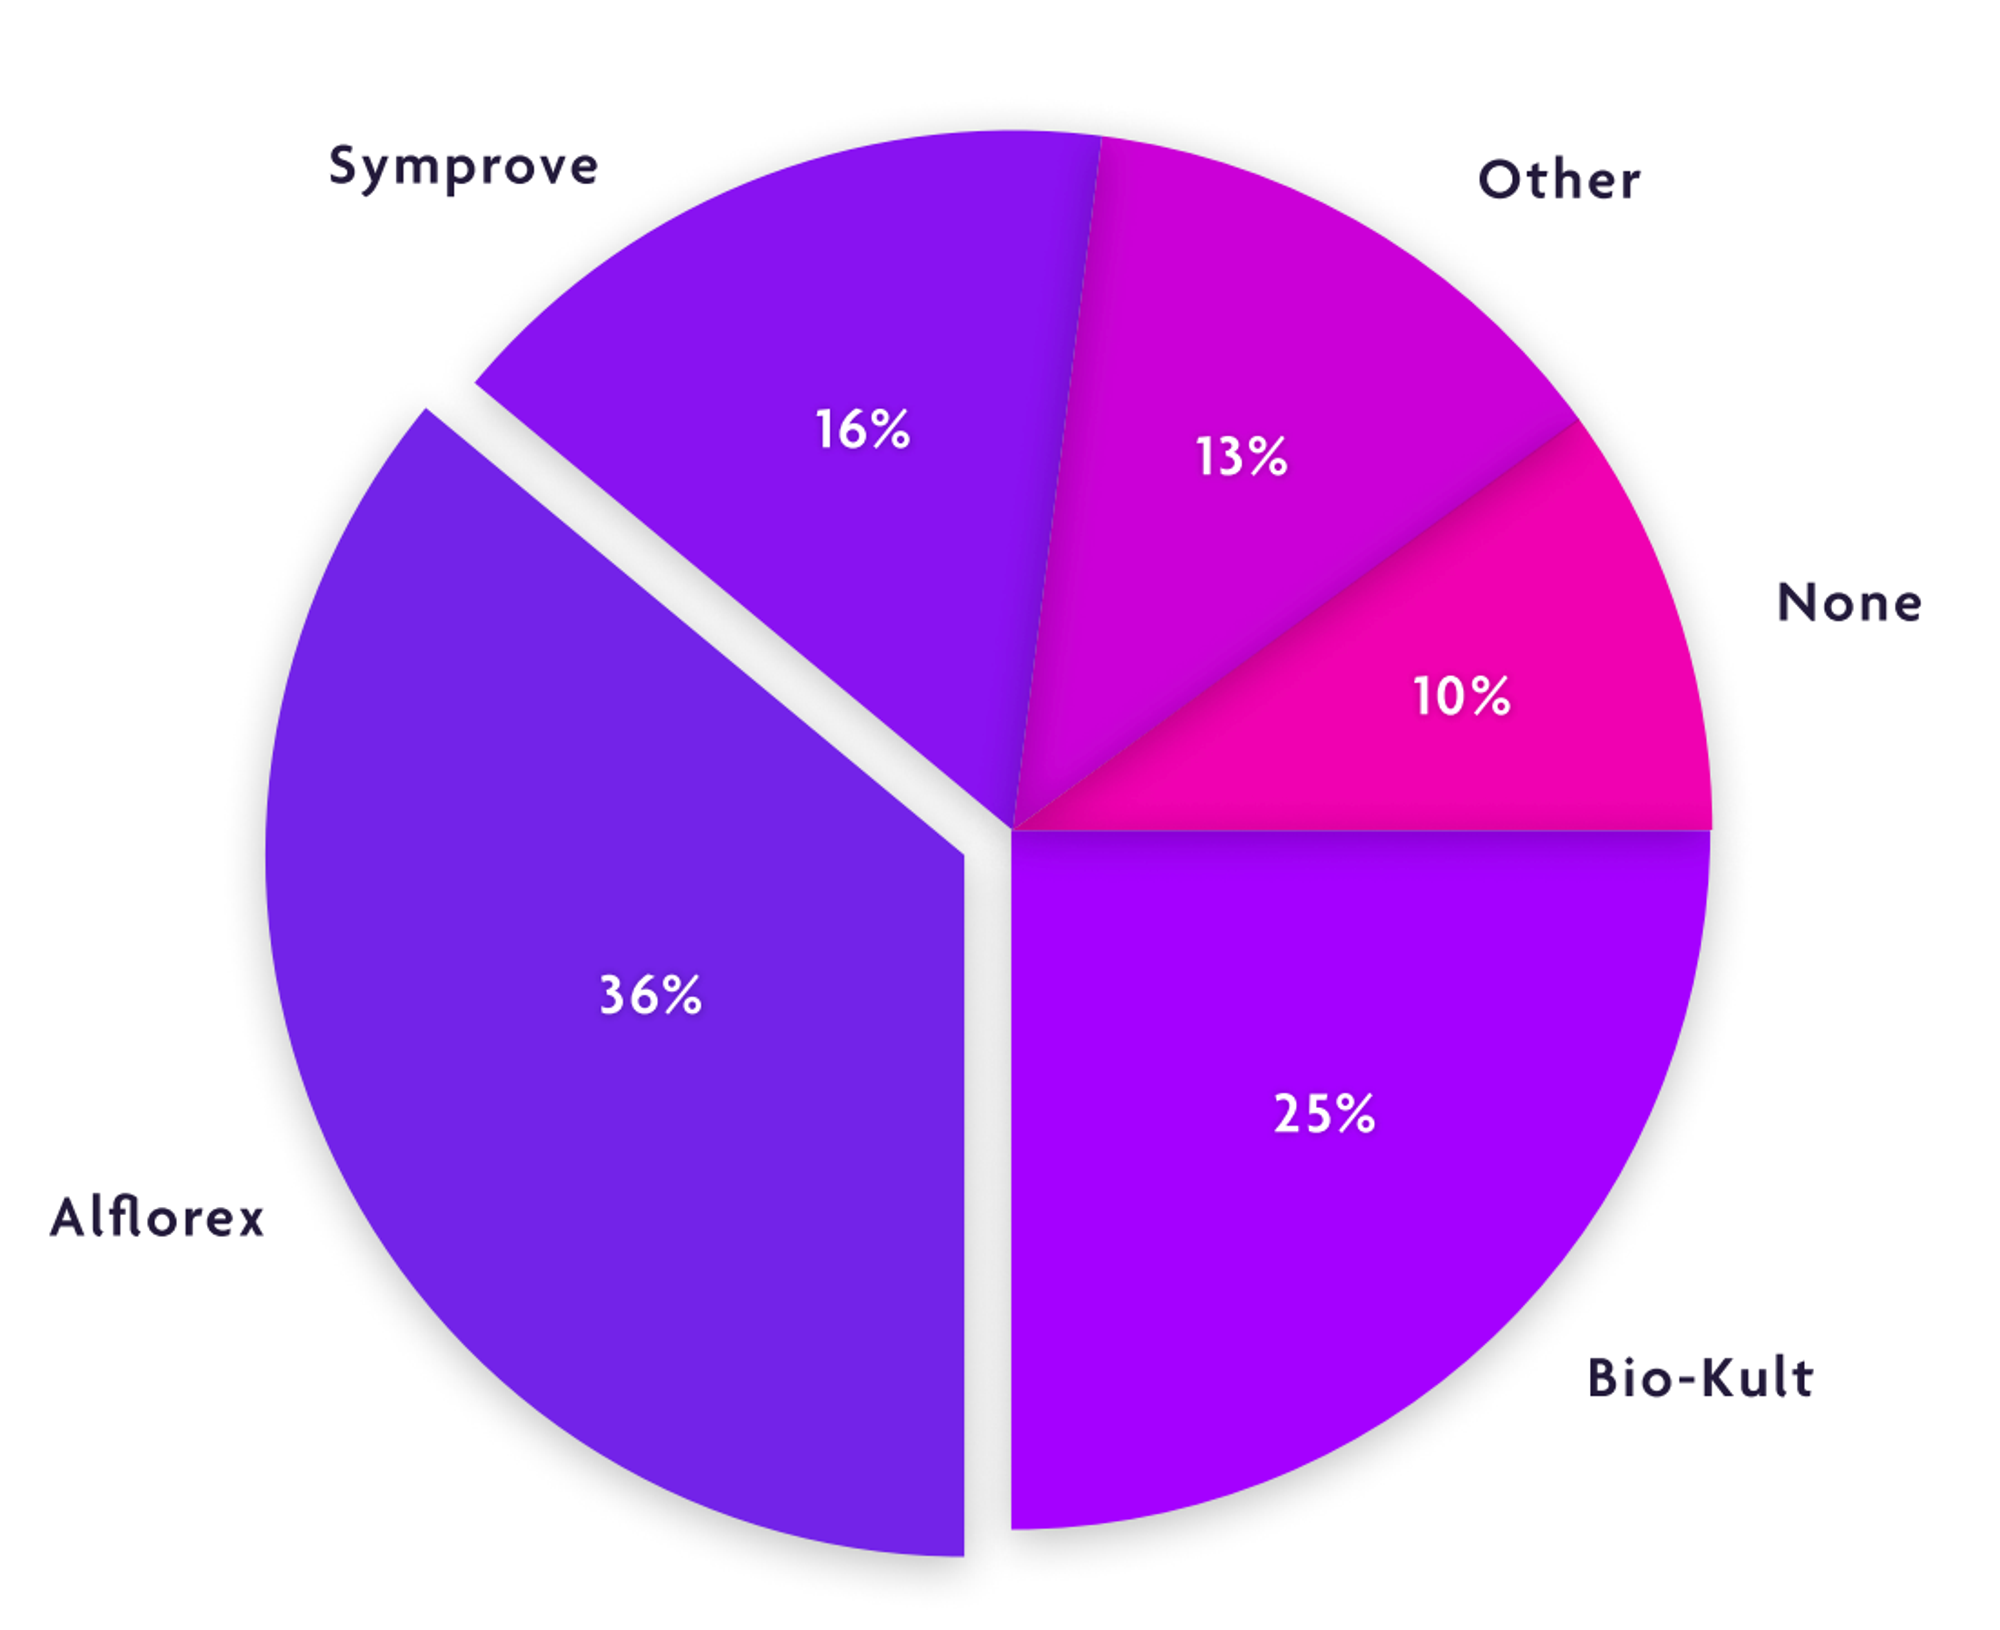 Figure 5: A piechart showing the breakdown of Alflorex and competitor products used by survey participants. Most respondents had a history of purchasing Alflorex, followed by Bio-Kult and Symprove. Other products taken by respondents include Yakult, kombucha, Dulcolax and Floratrex.